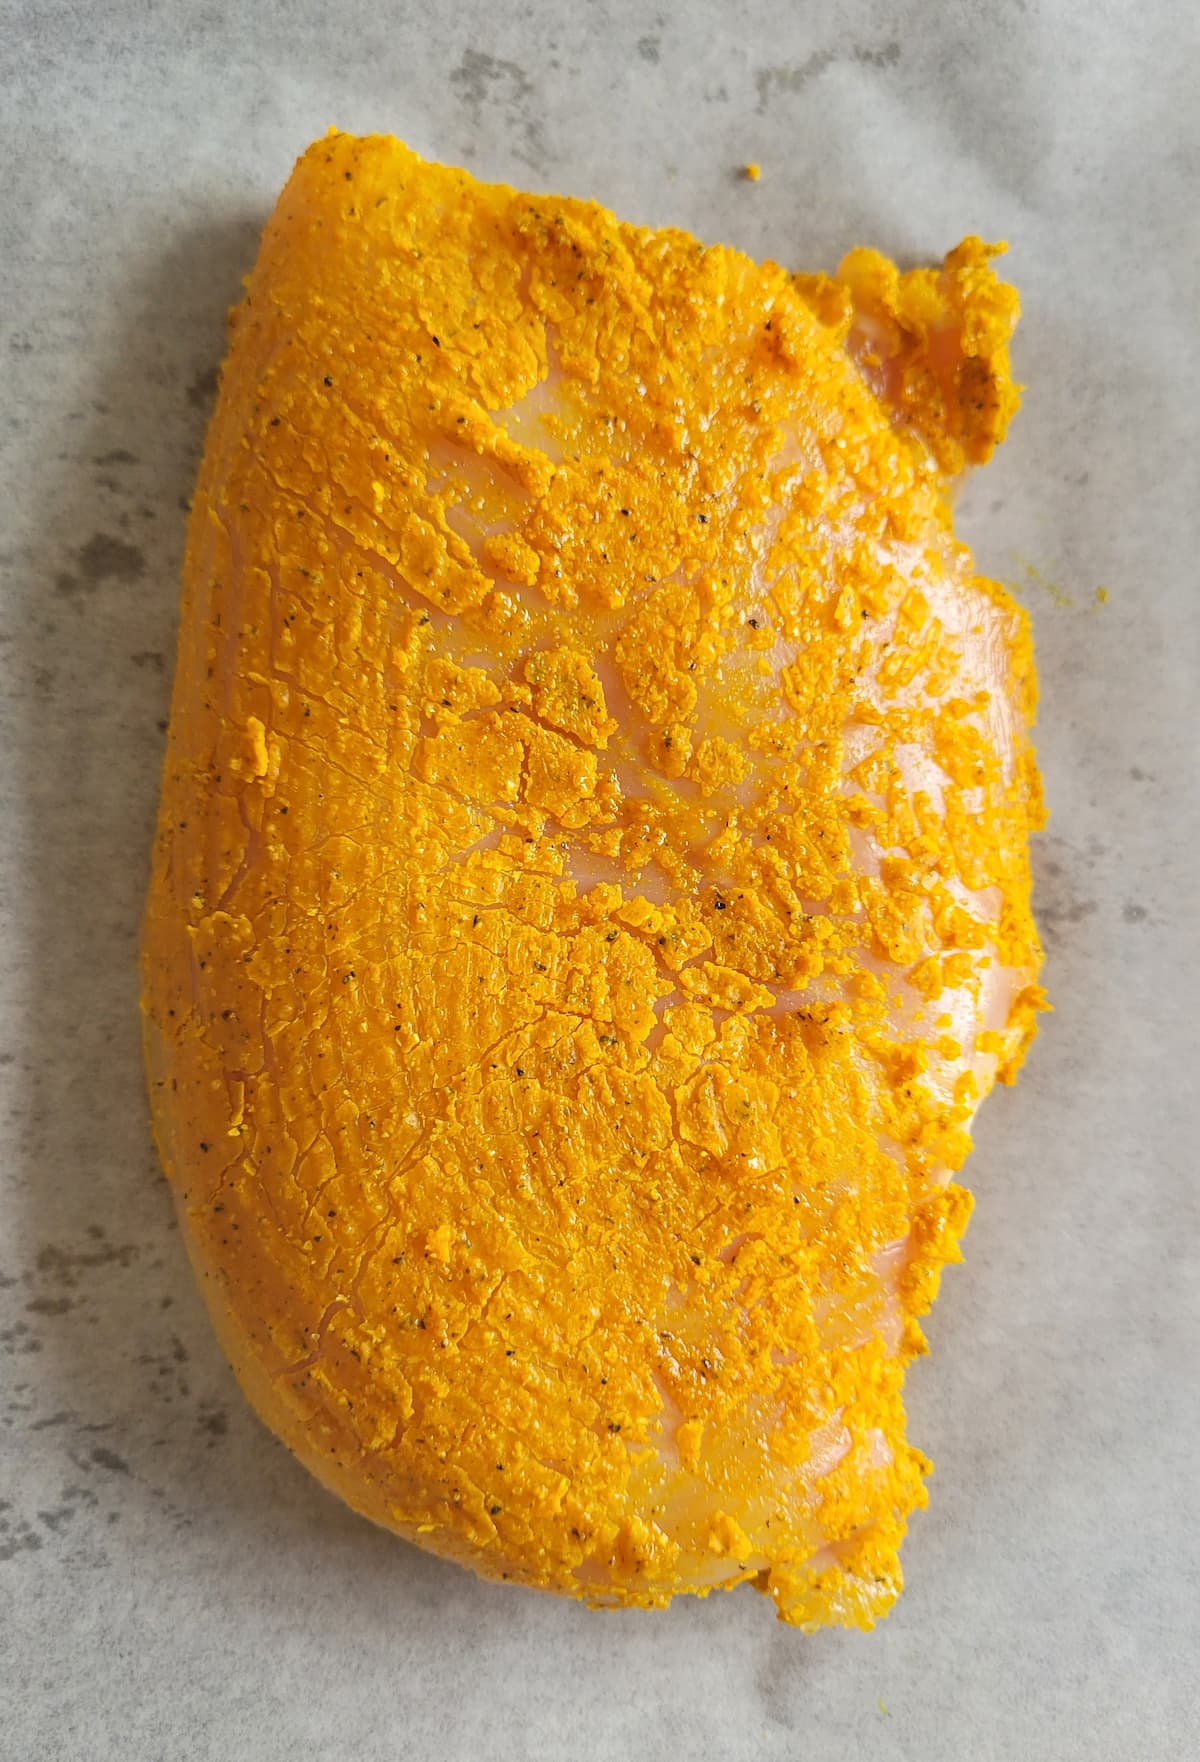 raw chicken breast with a bright yellow crust